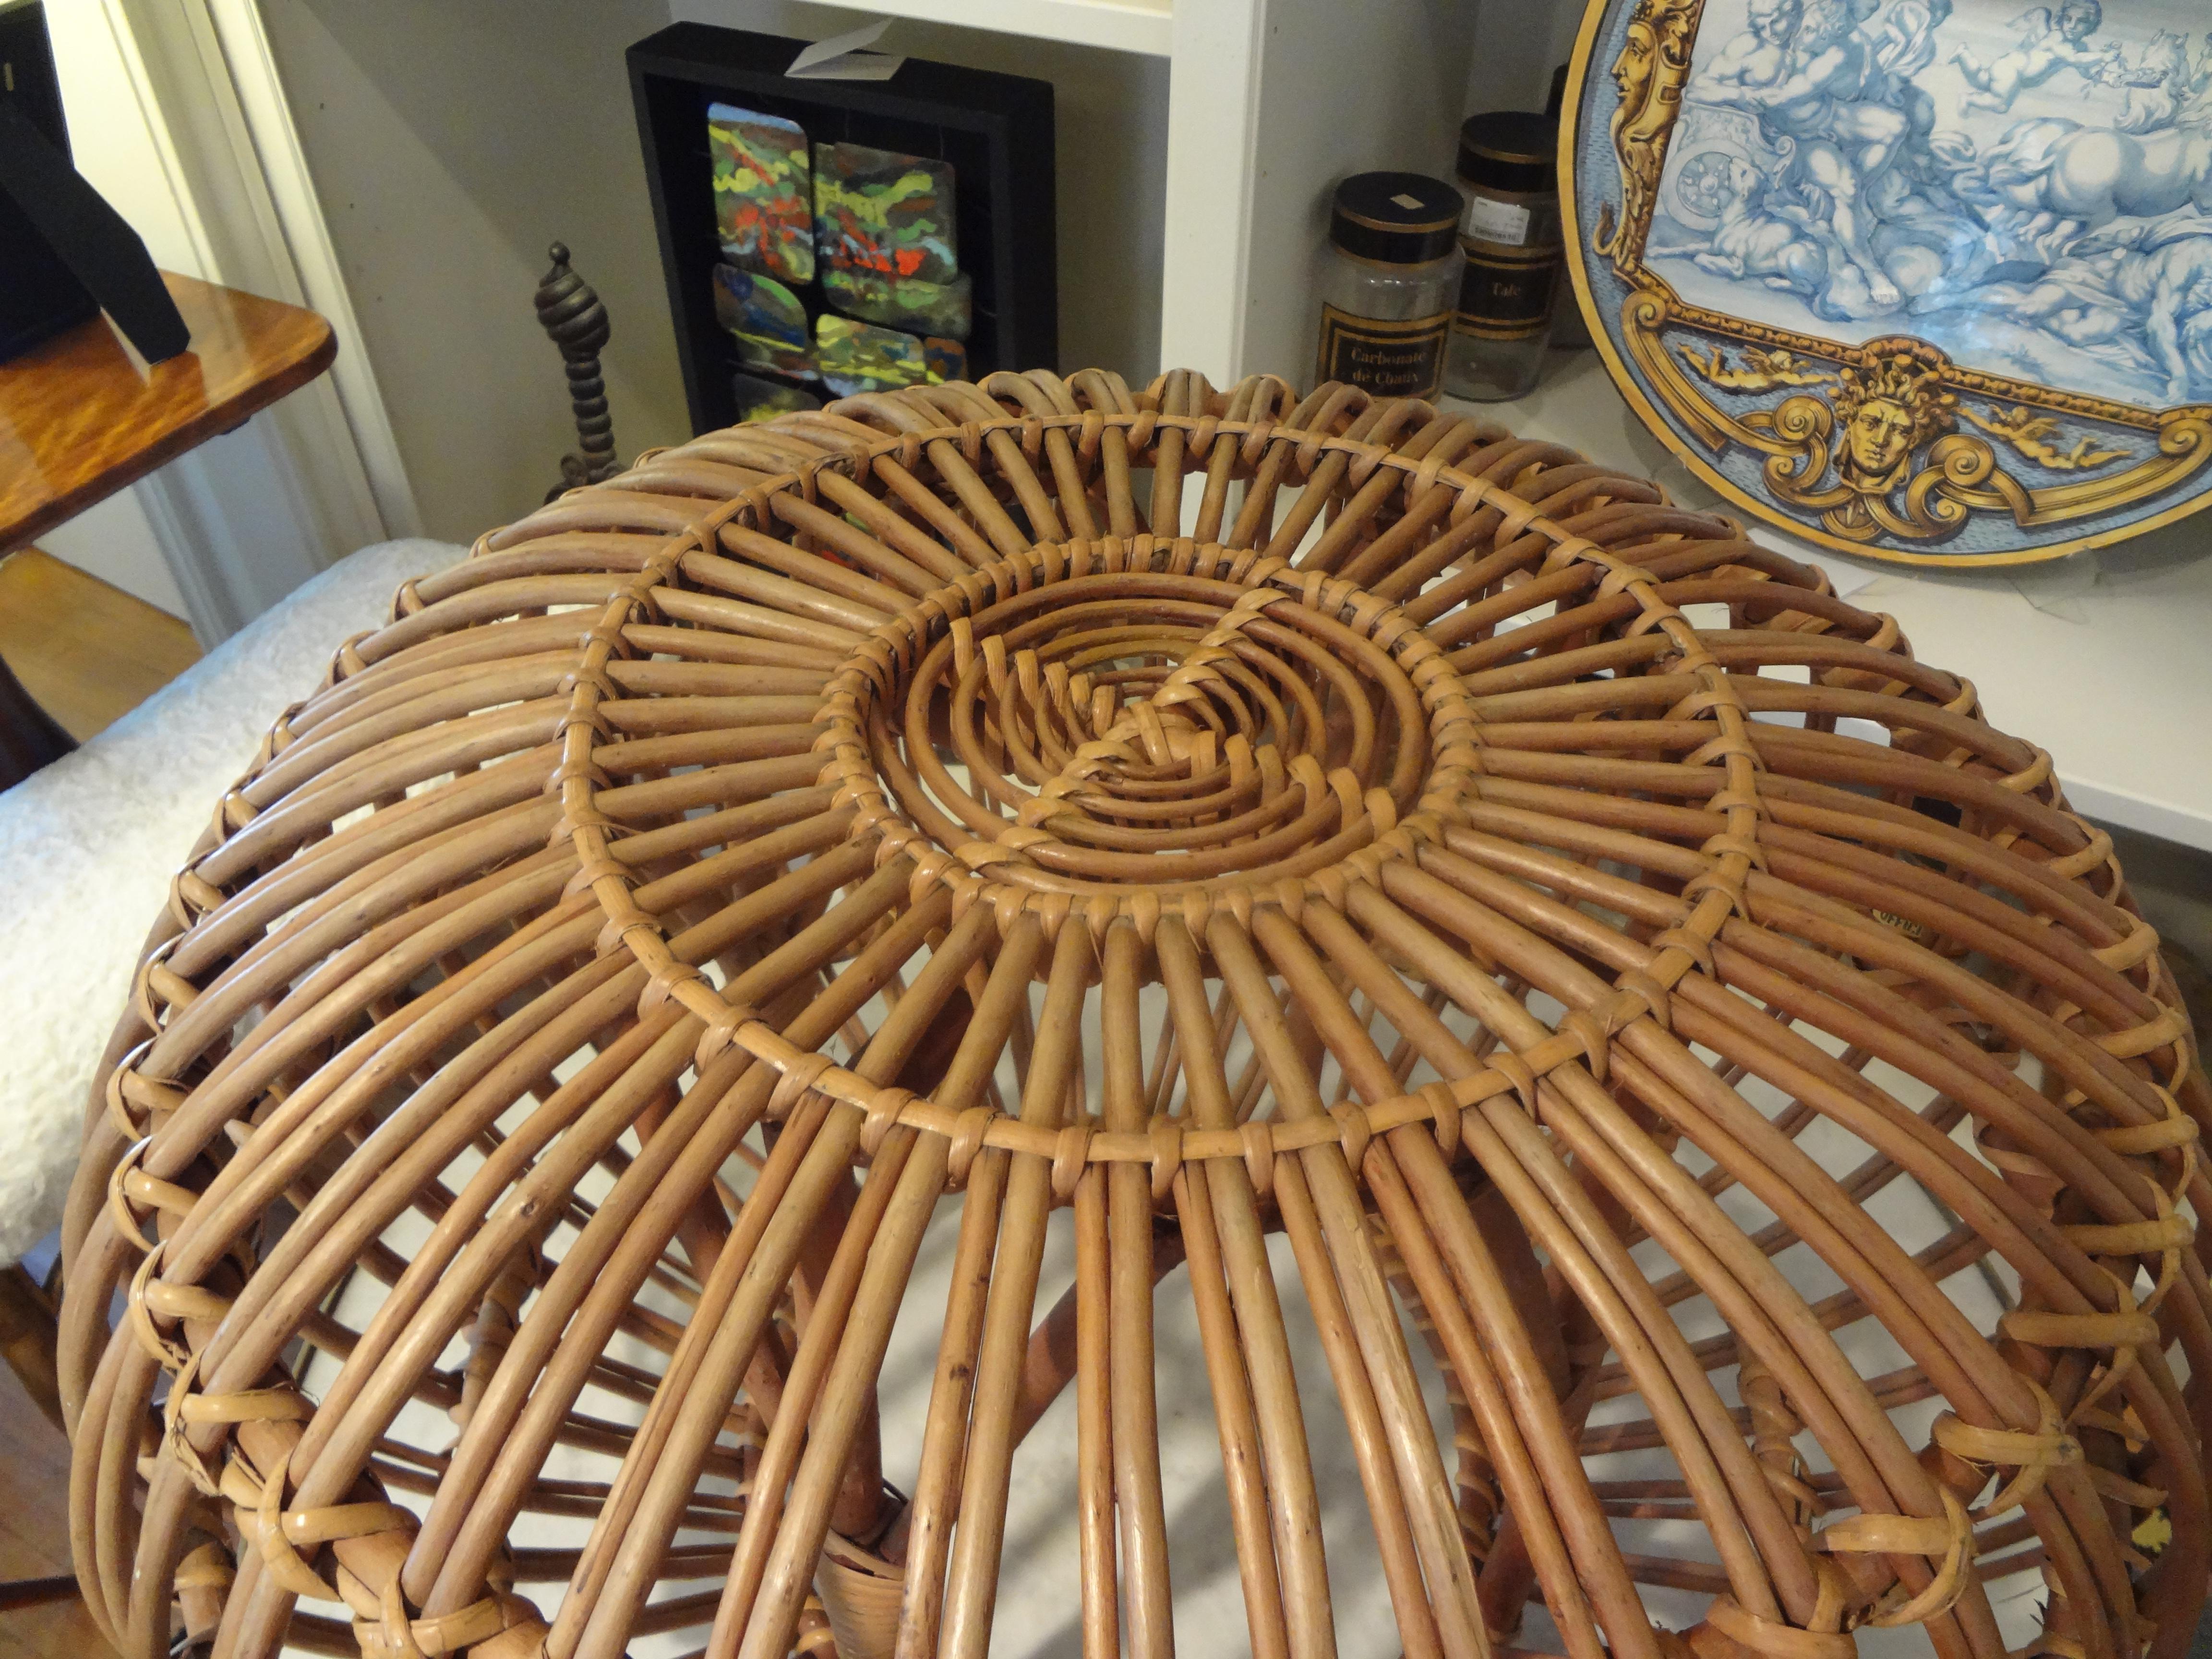 Mid-20th century woven rattan ottoman, pouf or stool designed by Italian designer Franco Albini. This versatile Hollywood Regency piece would make a great side table. This would work well in a variety of design settings.